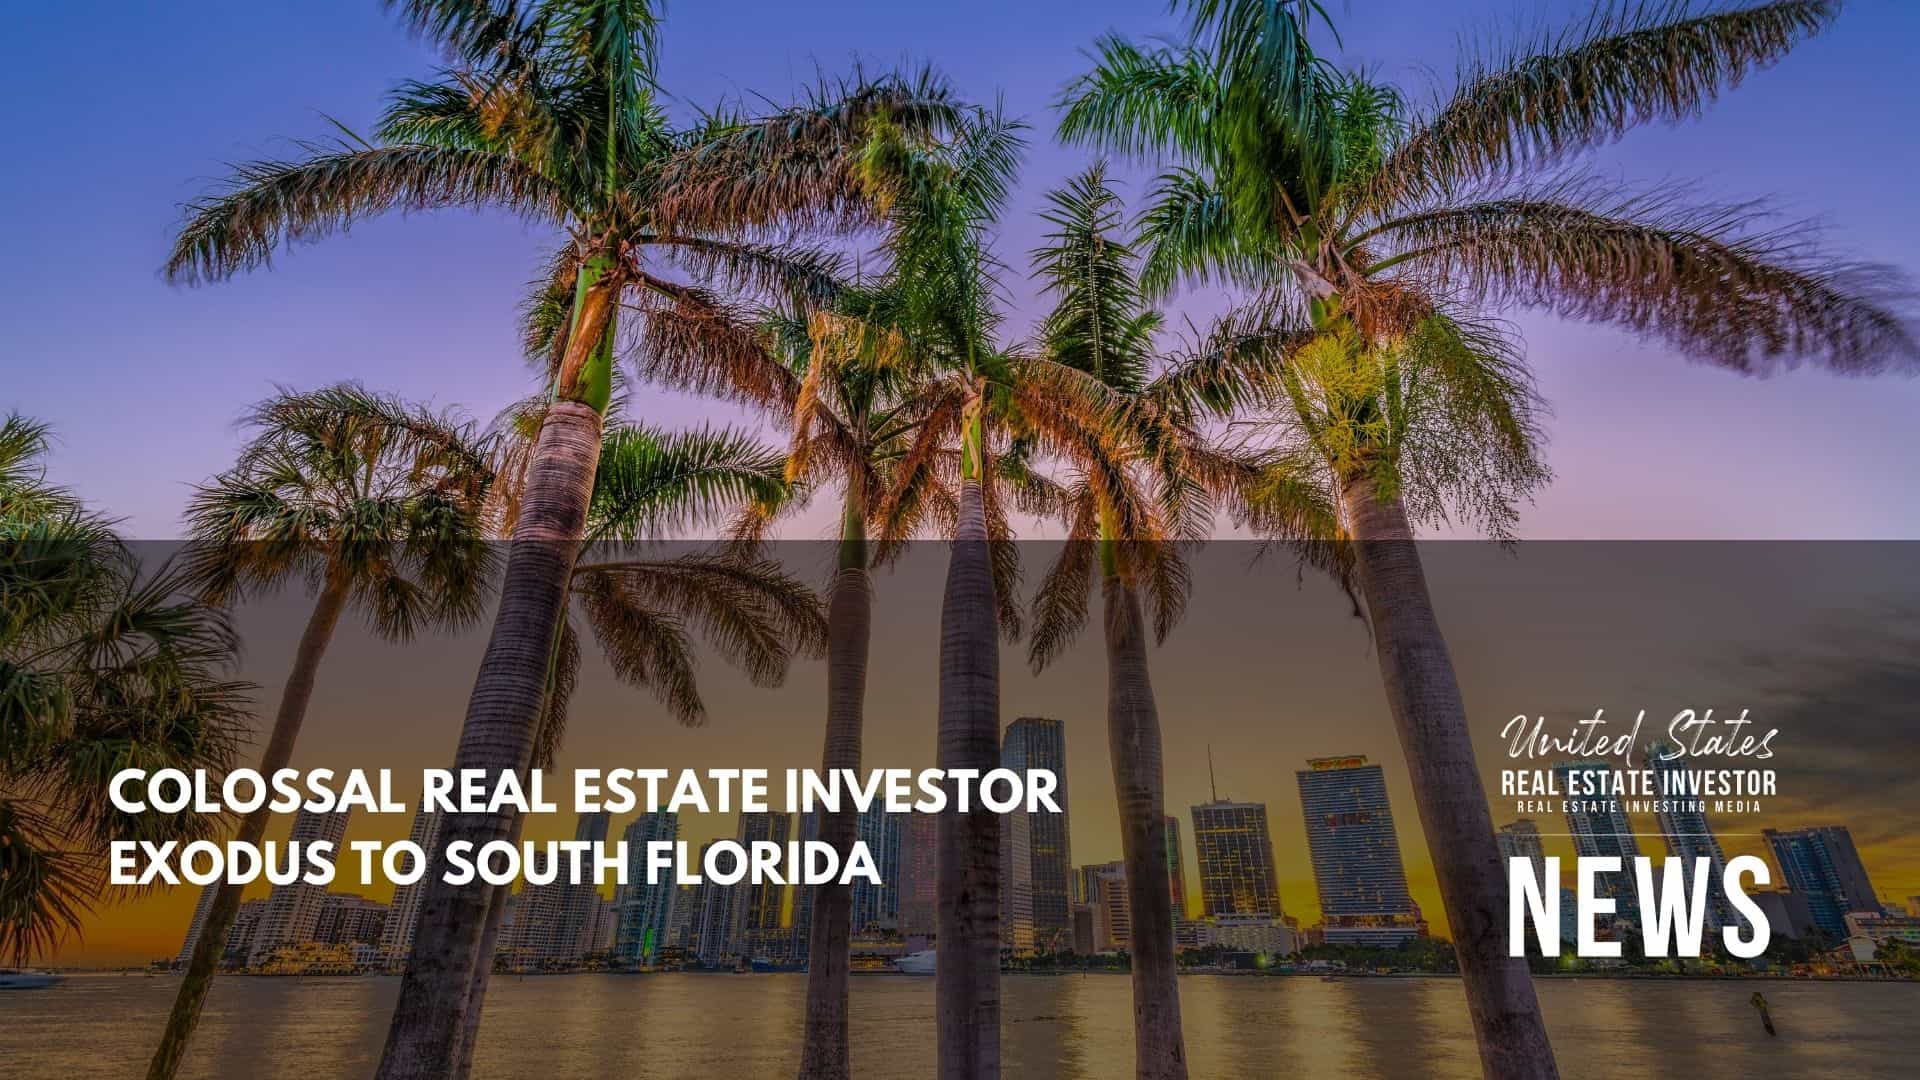 United States Real Estate Investor - Real estate investing media - Colossal Real Estate Investor Exodus To South Florida